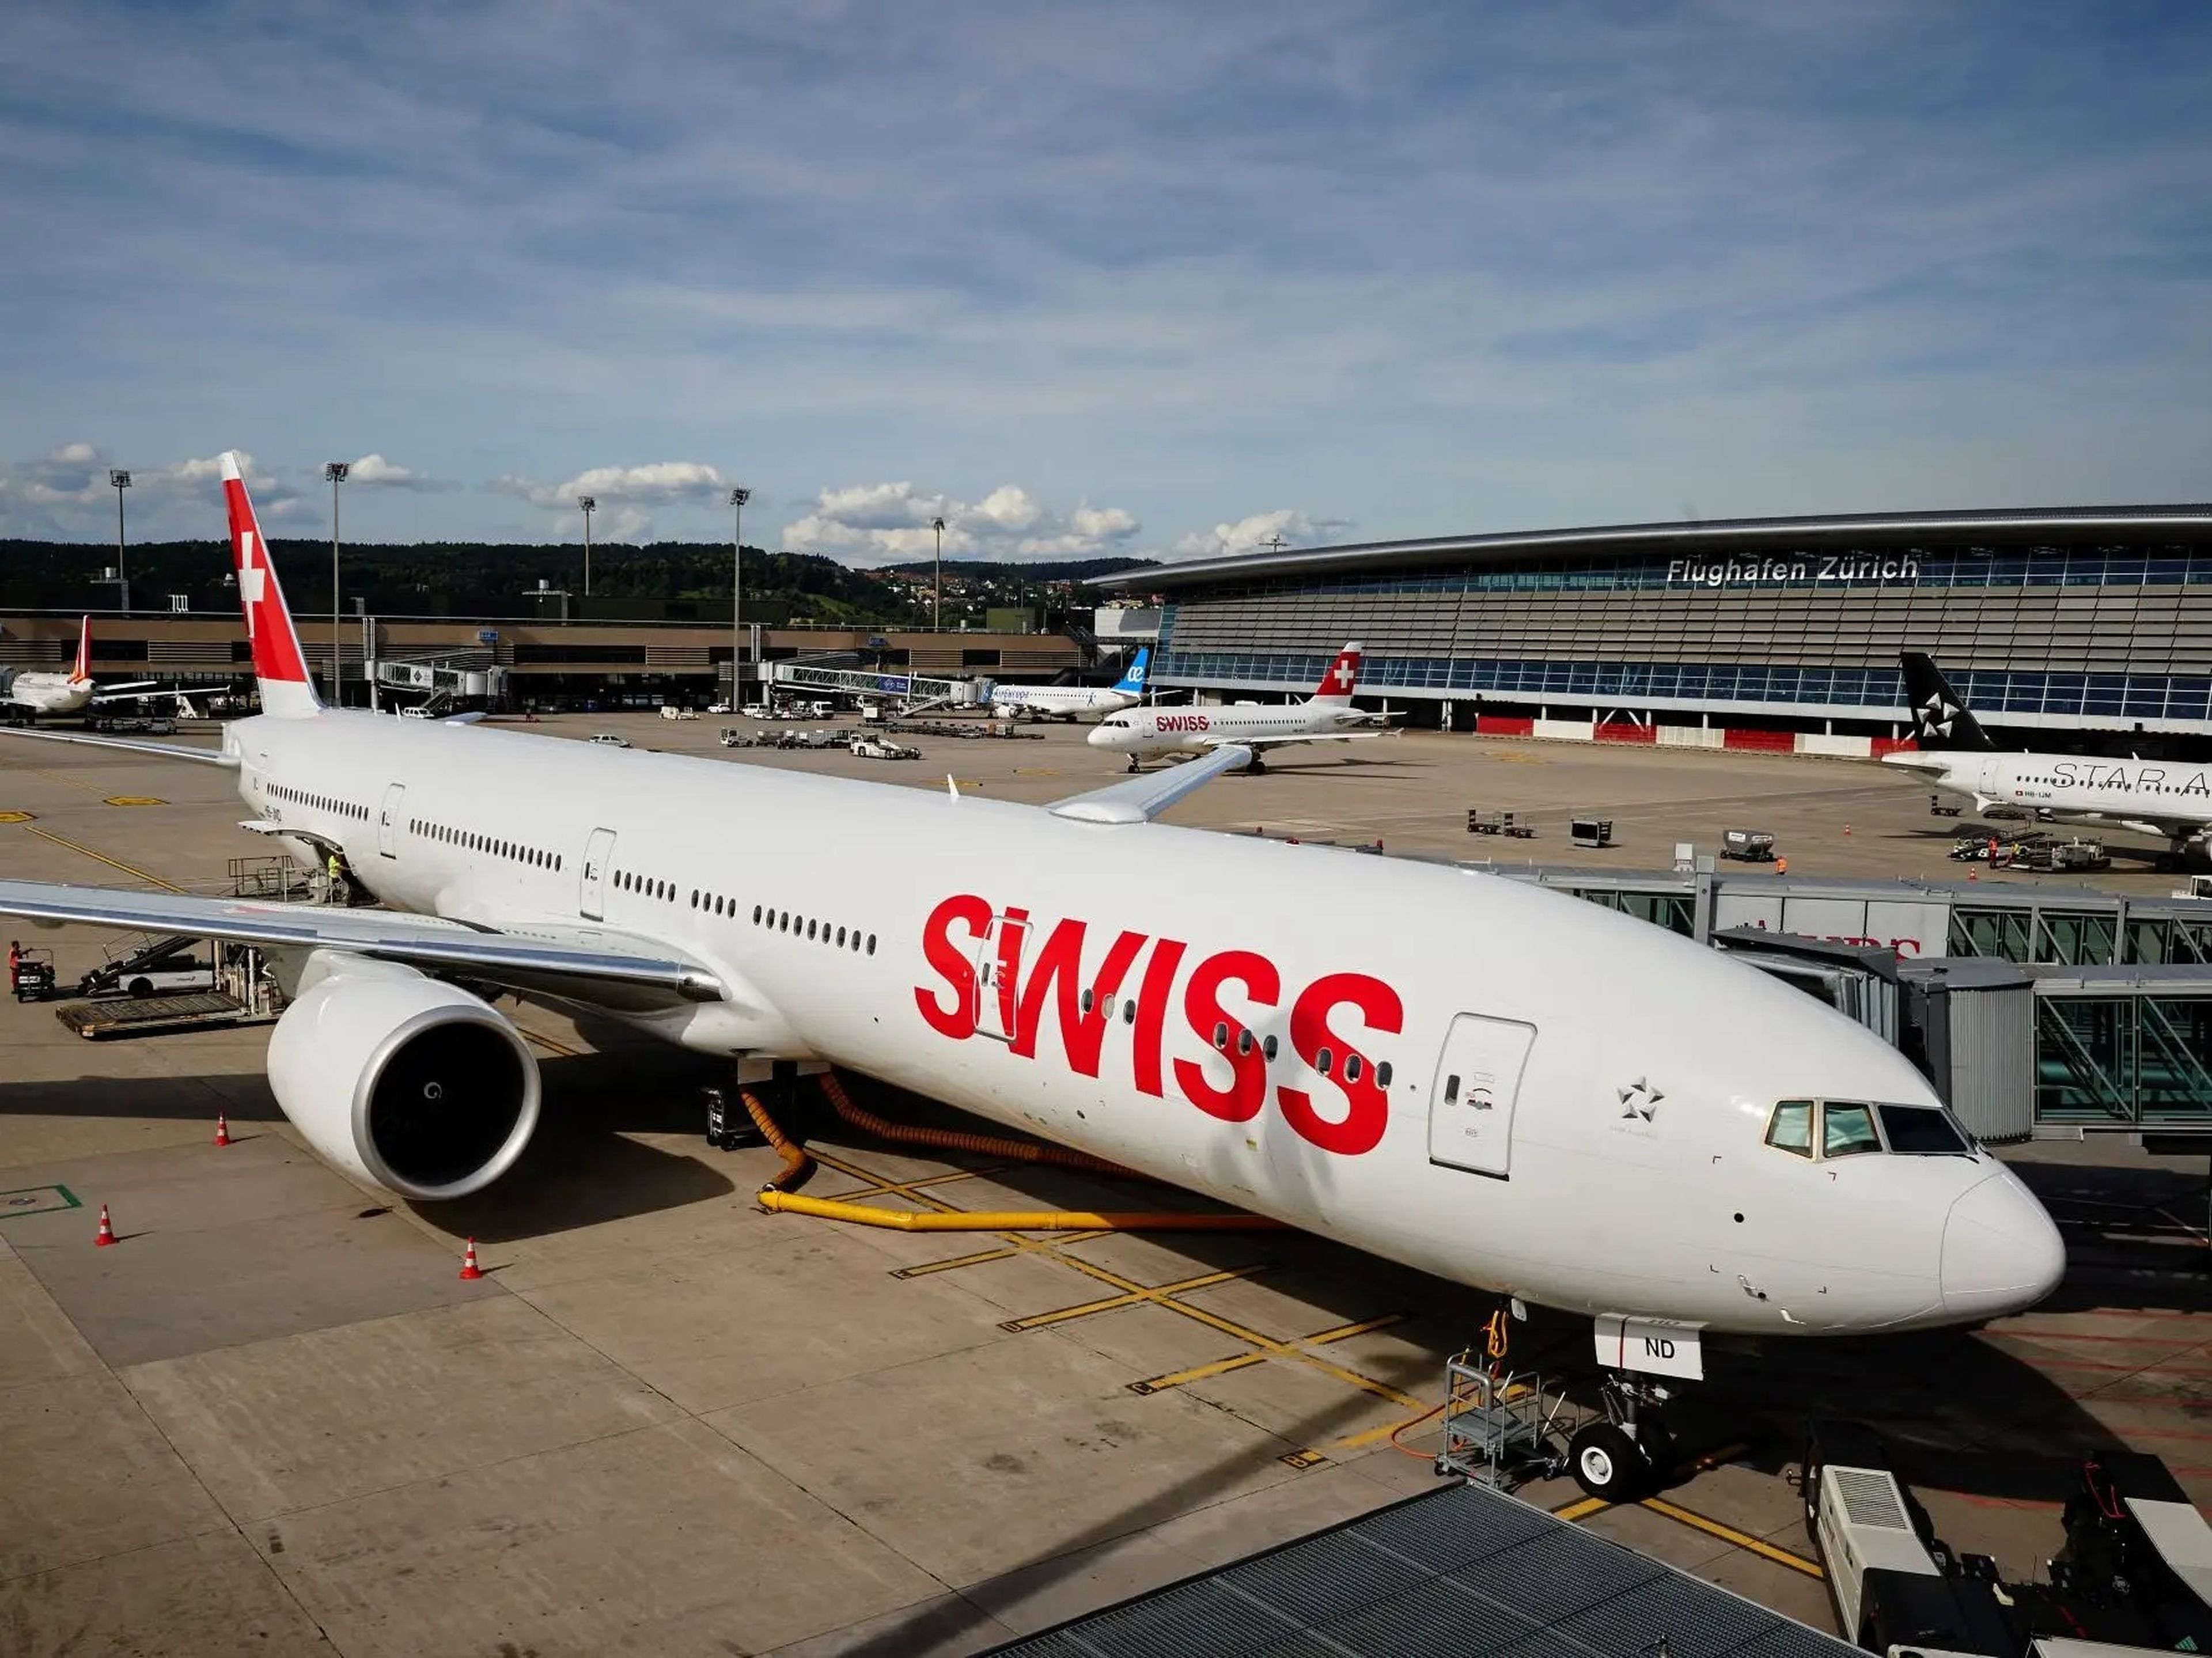 A SWISS 777 parked at the gate.